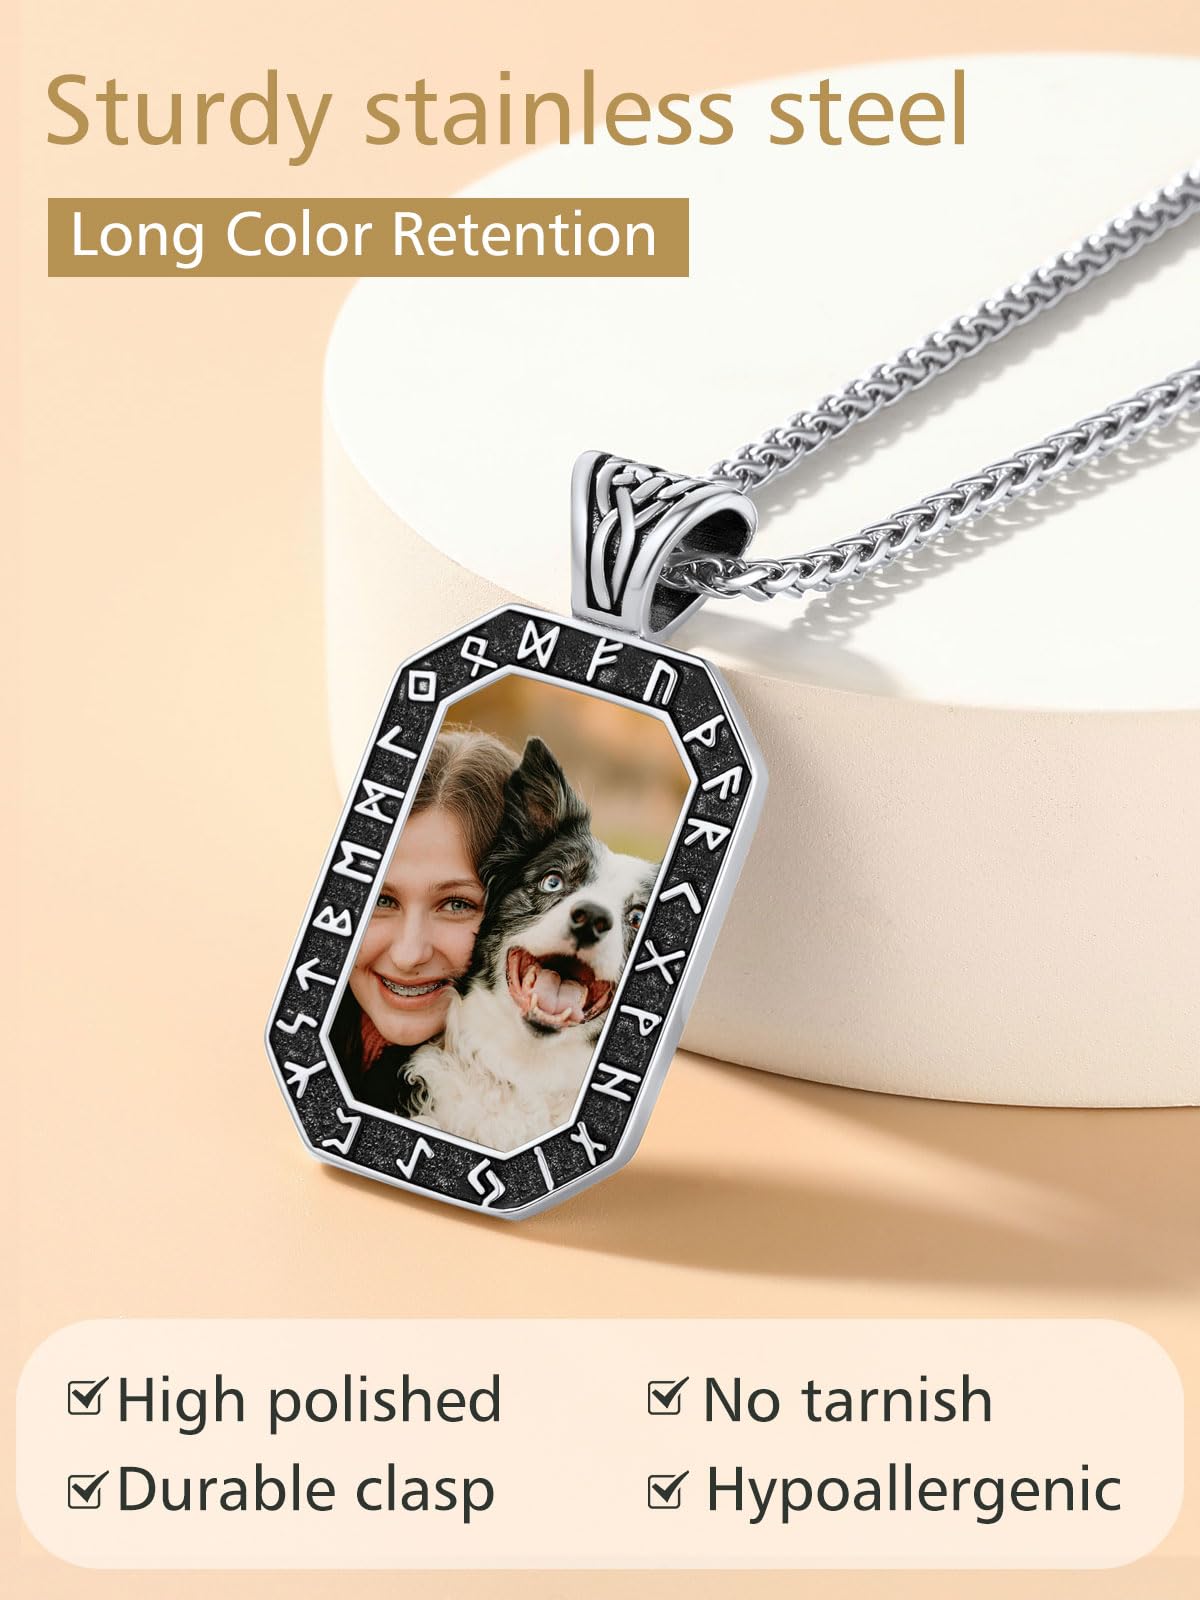 FindChic Custom Picture Necklaces for Men Women Skull/Viking Rune/Olive Leaves Stainless Steel/Gold Plated/Black Personalized Photo Pendant Memorial Gifts for Loss Loved Ones + Gift Box